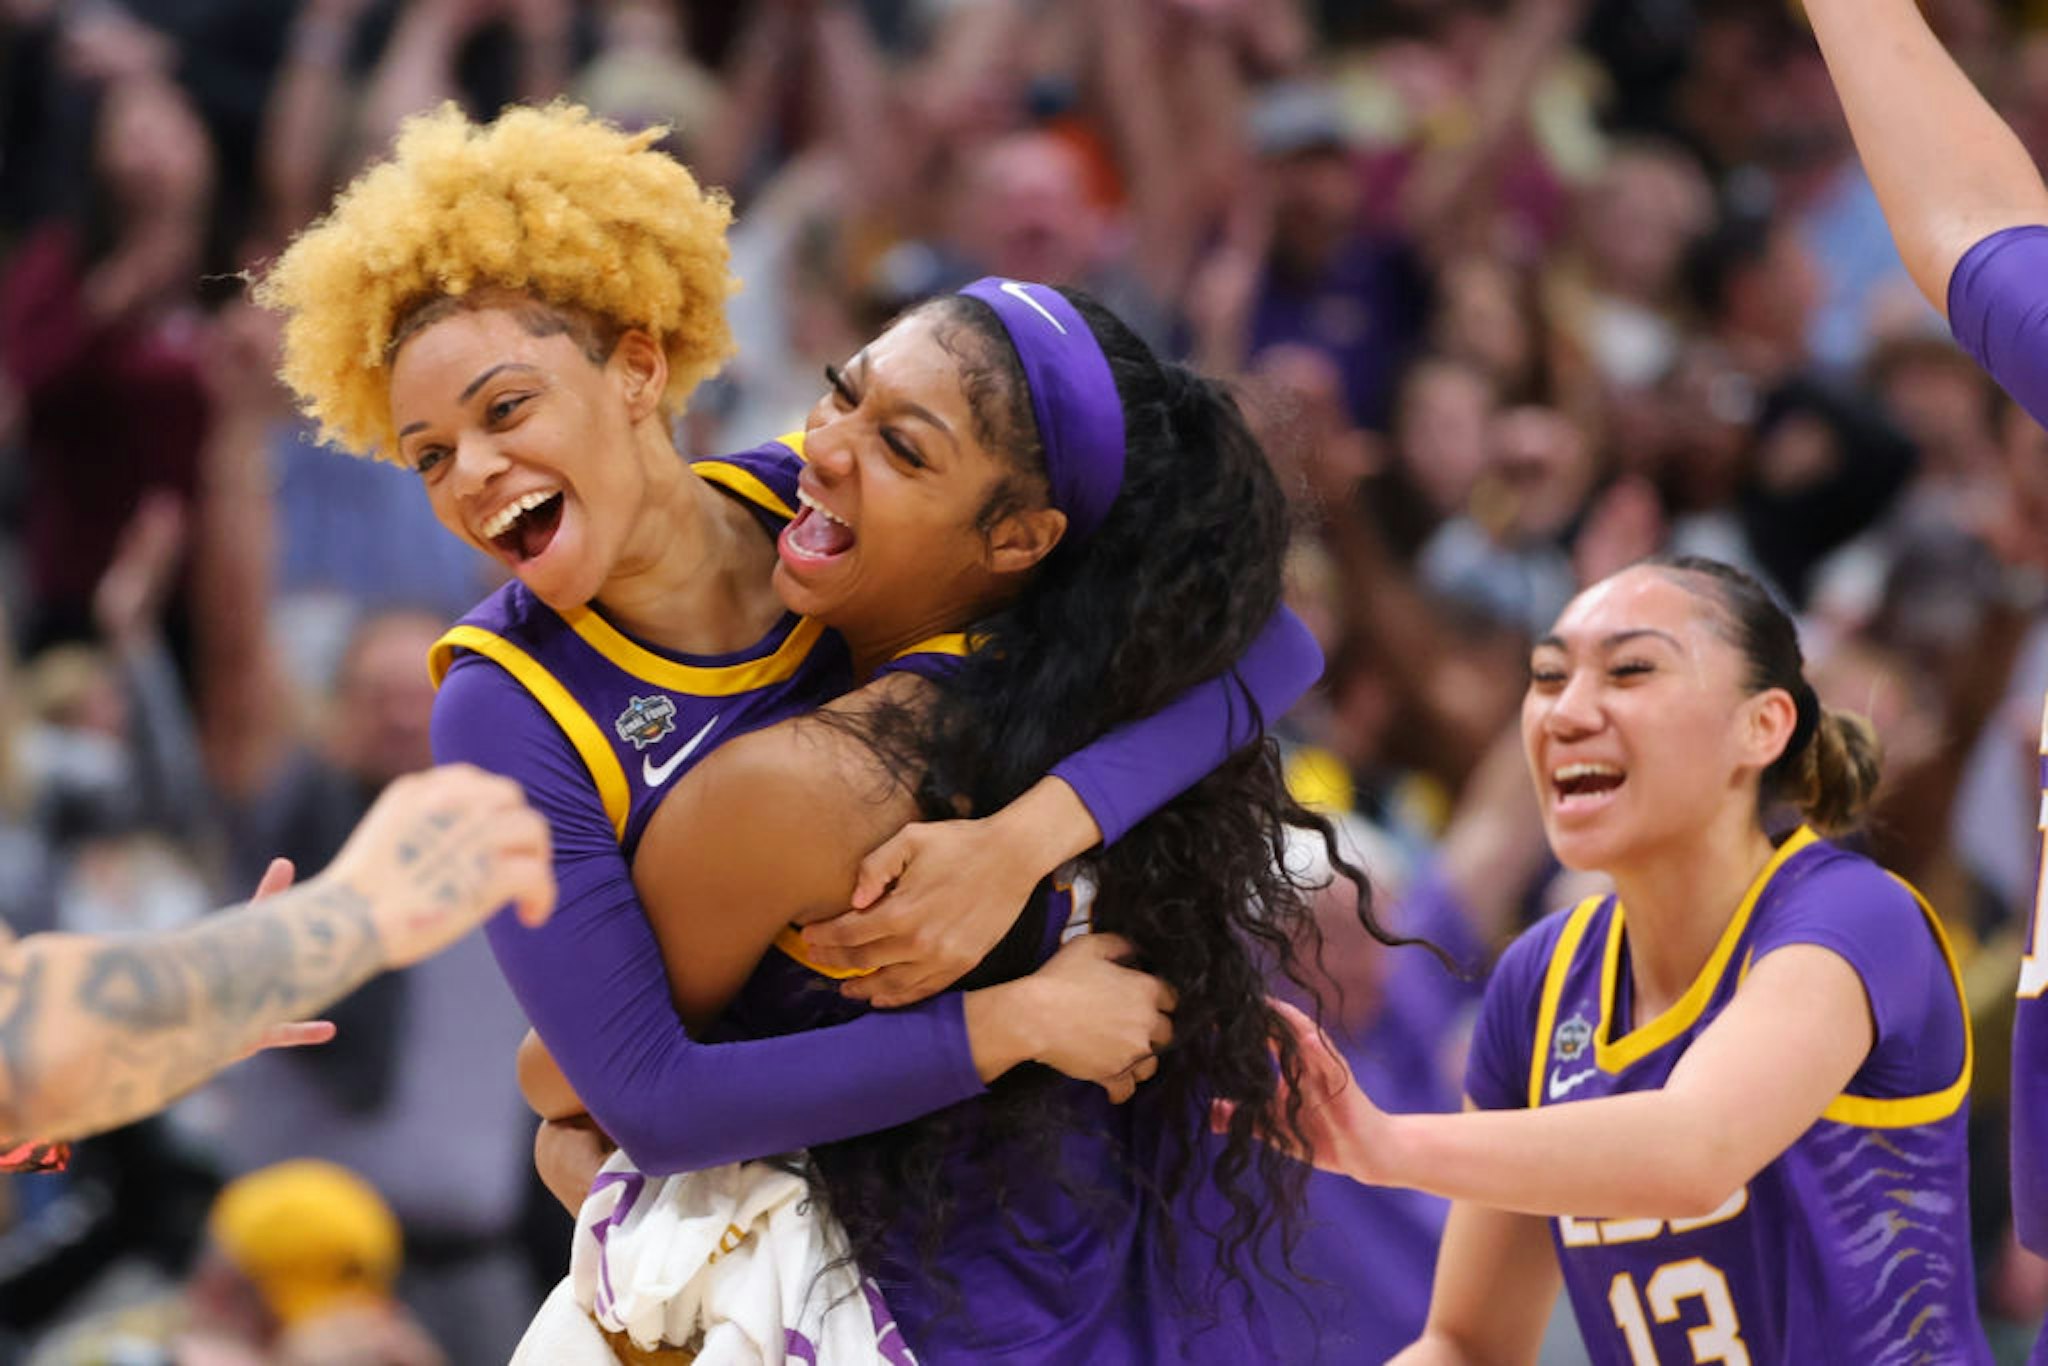 DALLAS, TX - APRIL 02: Jasmine Carson #2 and Angel Reese #10 of the Louisiana State Tigers celebrate a three-point goal against the Iowa Hawkeyes during the 2023 NCAA Women's Basketball Tournament National Championship at American Airlines Center on April 2, 2023 in Dallas, Texas. (Photo by C. Morgan Engel/NCAA Photos via Getty Images)